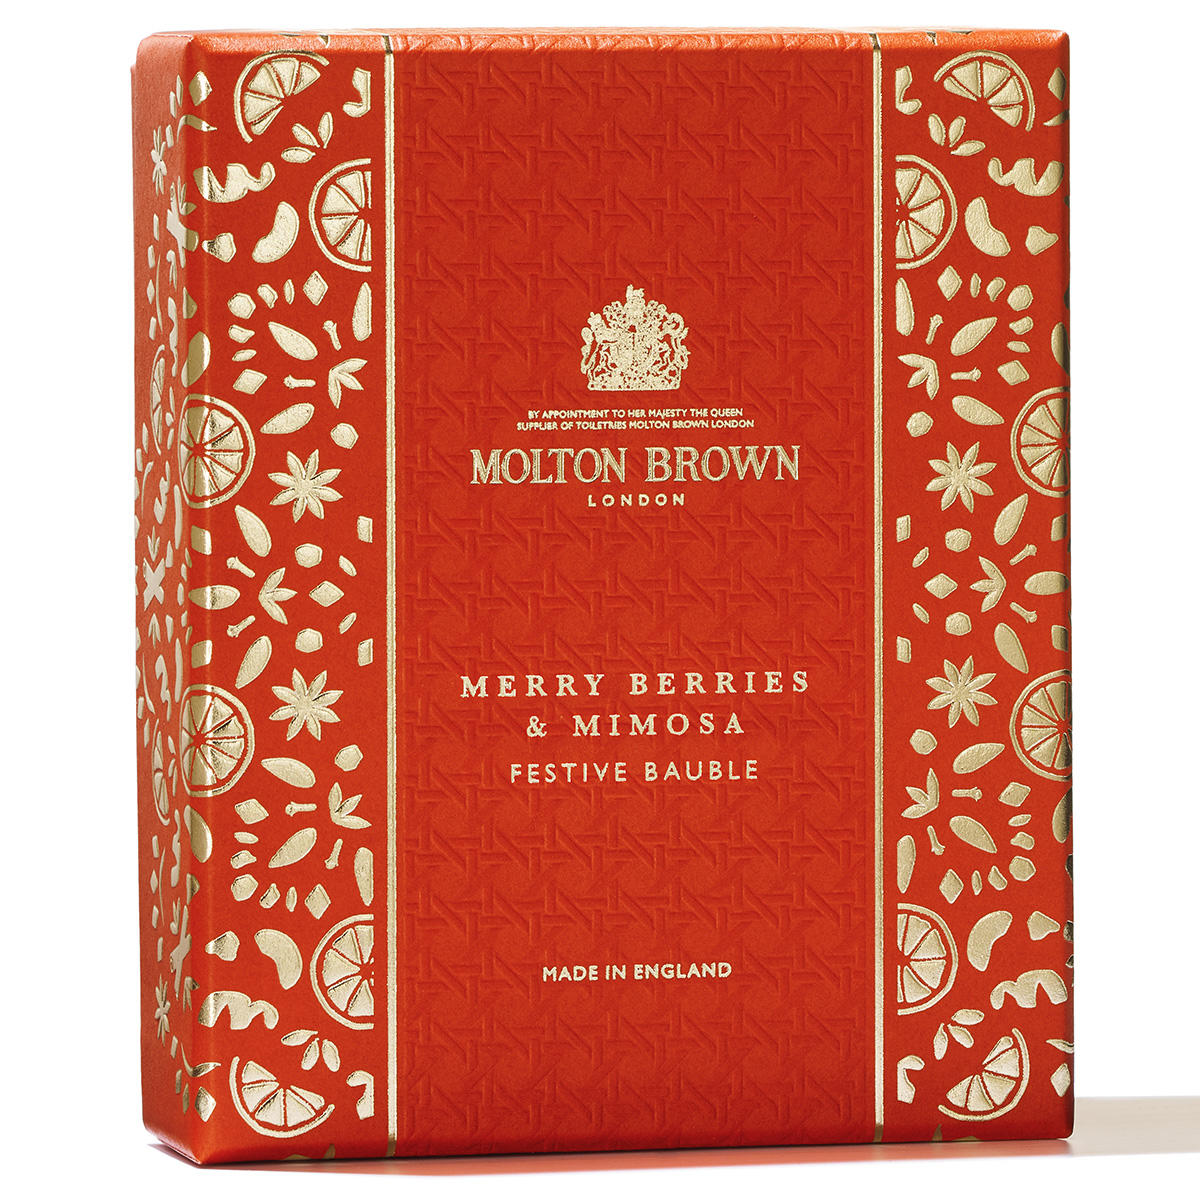 MOLTON BROWN Merry Berries & Mimosa Festive Bauble 75 ml - 2